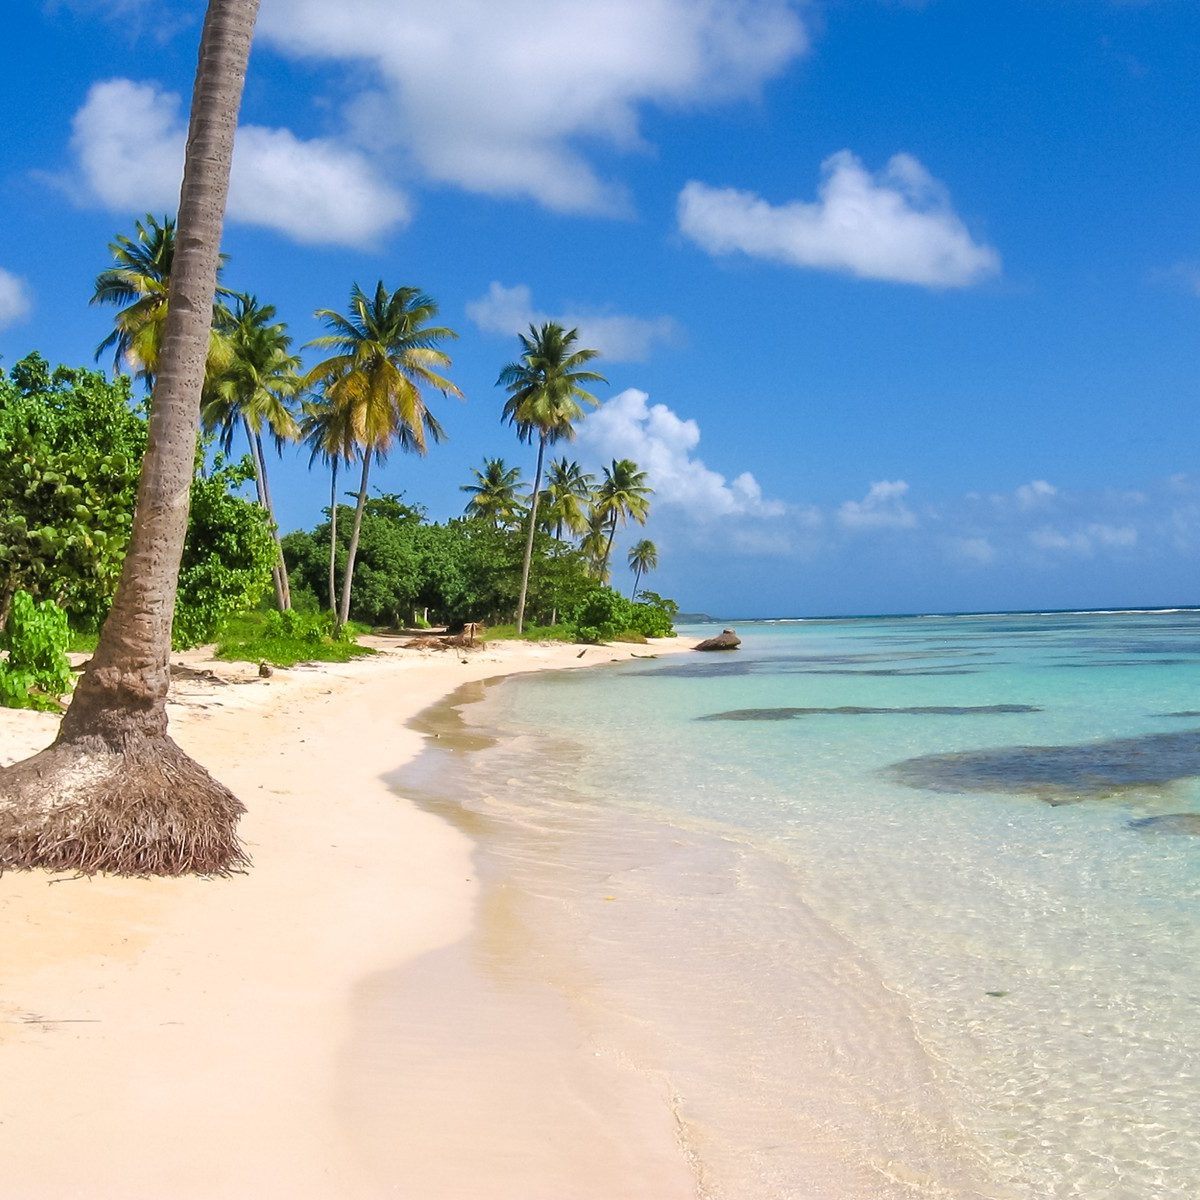 Coconut palms, turquoise sea and white sandy beach of Sainte-Anne Guadeloupe, Antilles, Caribbean.